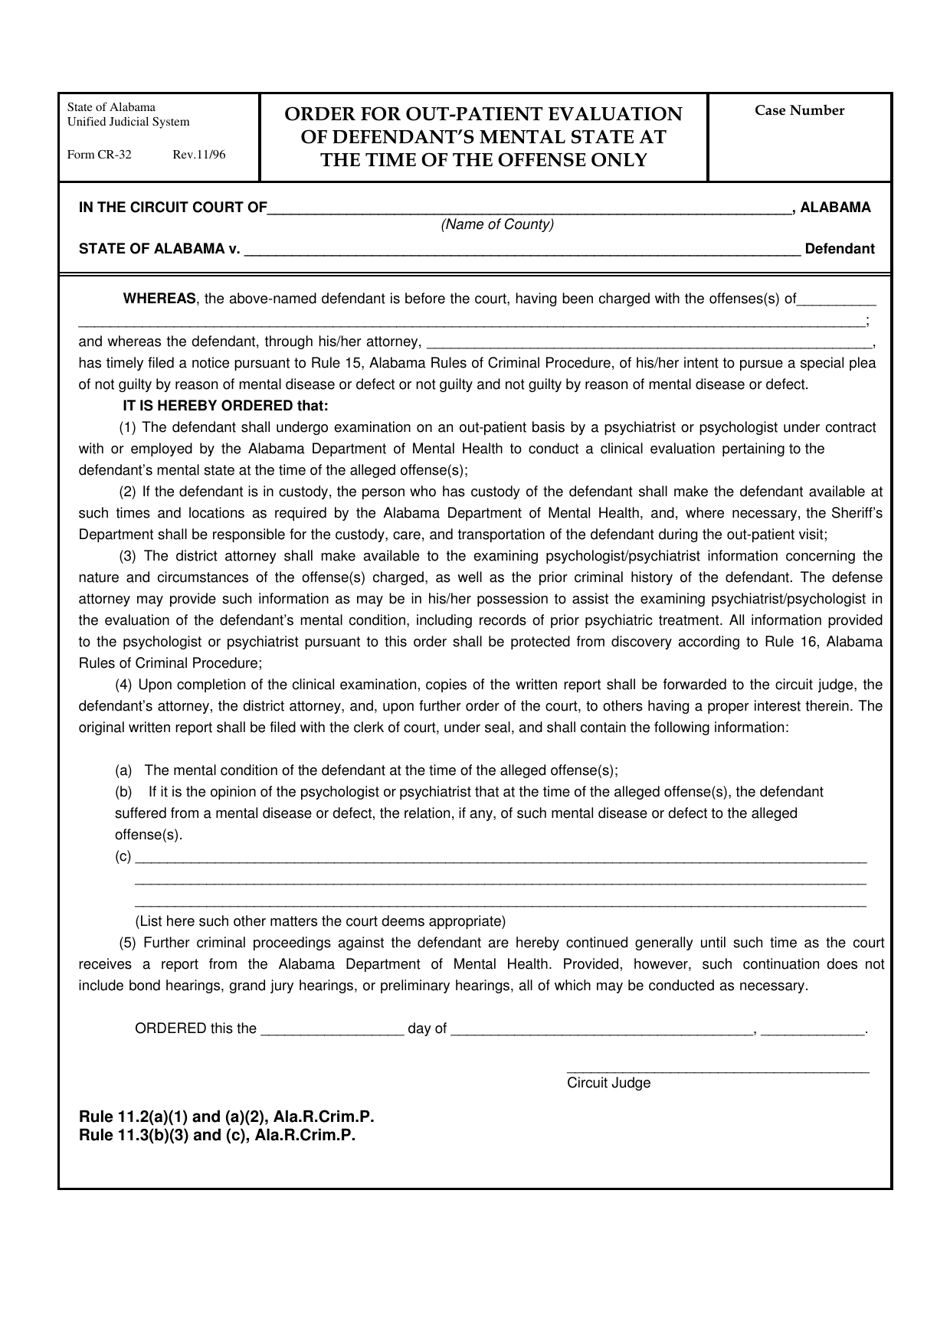 Form CR-32 Order for out-Patient Evaluation of Defendants Mental State at the Time of the Offense Only - Alabama, Page 1